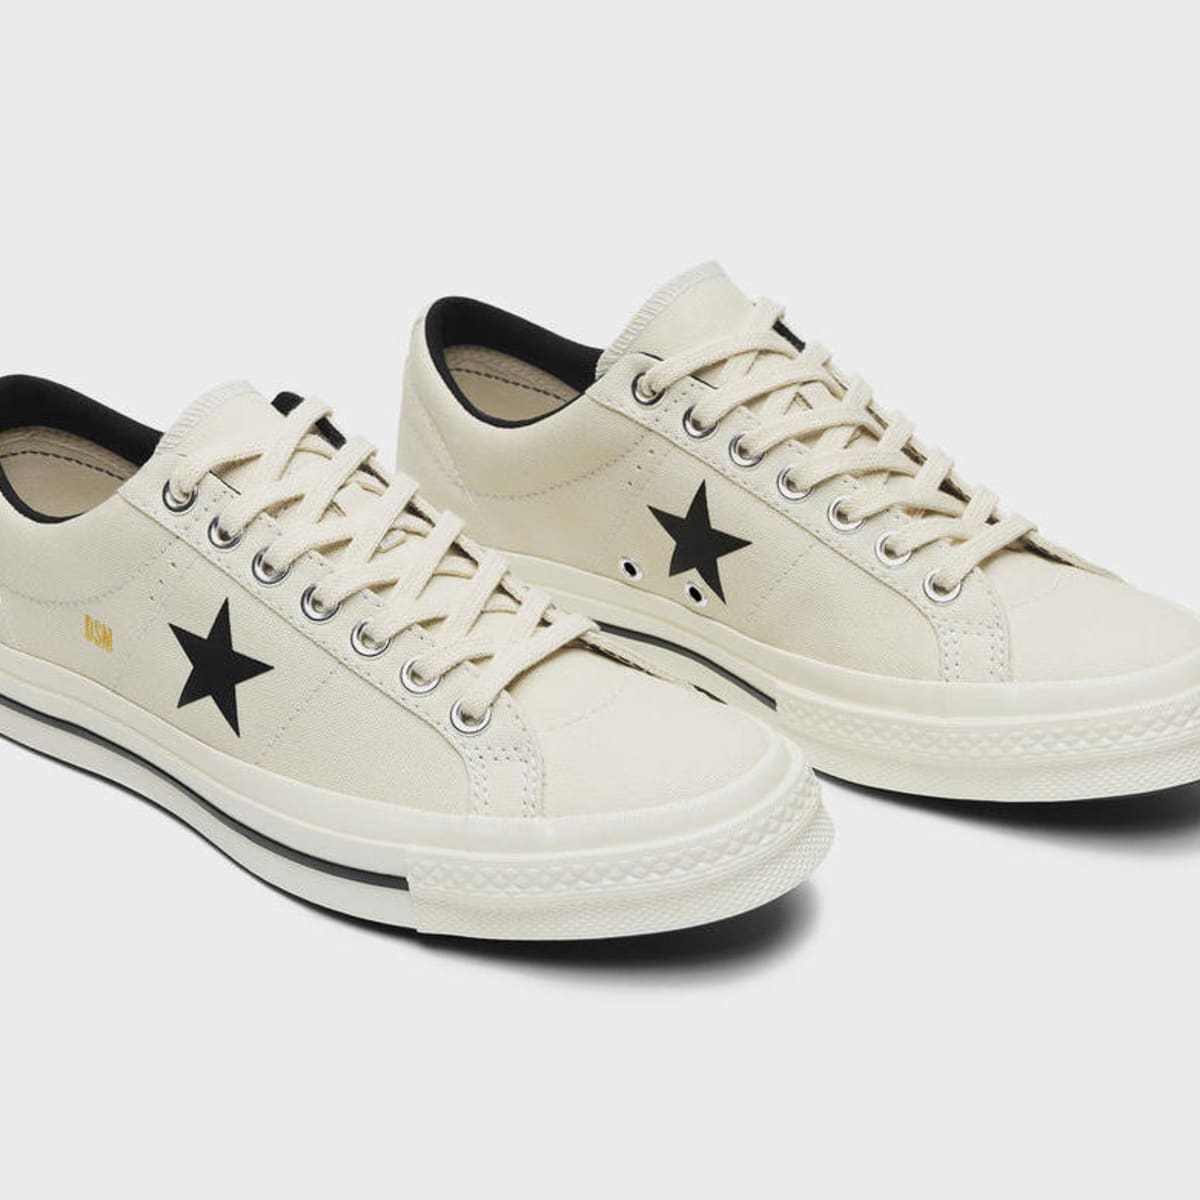 converse one star special edition